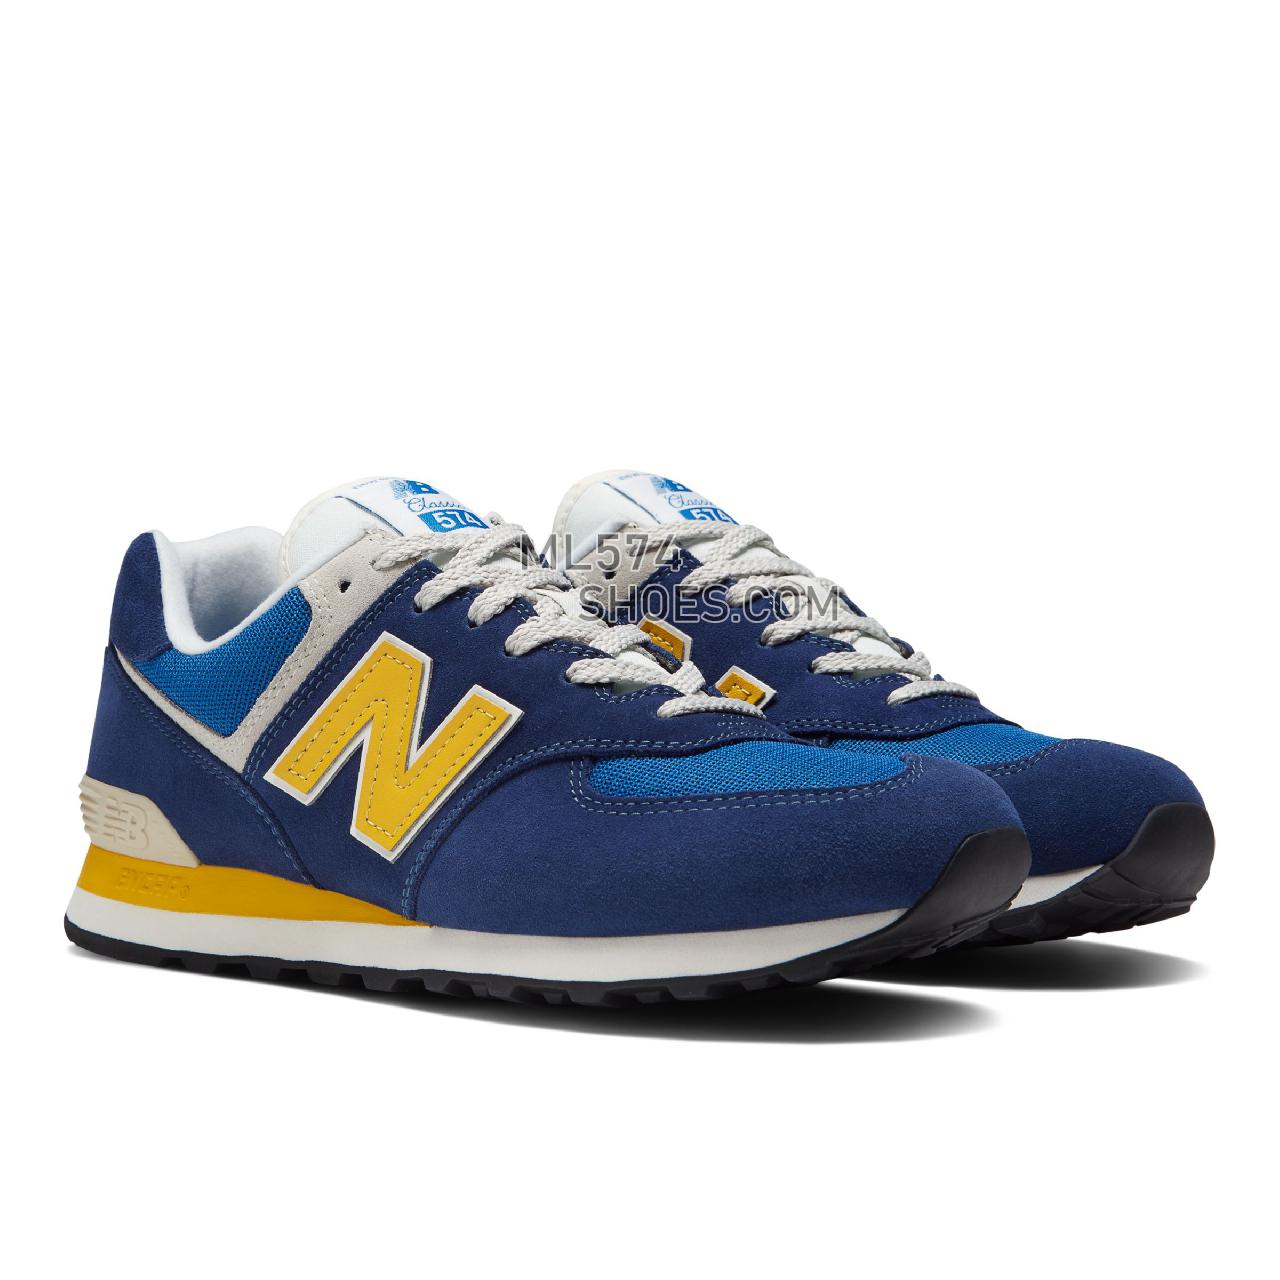 New Balance 574v2 - Unisex Men's Women's Classic Sneakers - Navy with Yellow - ML574OR2